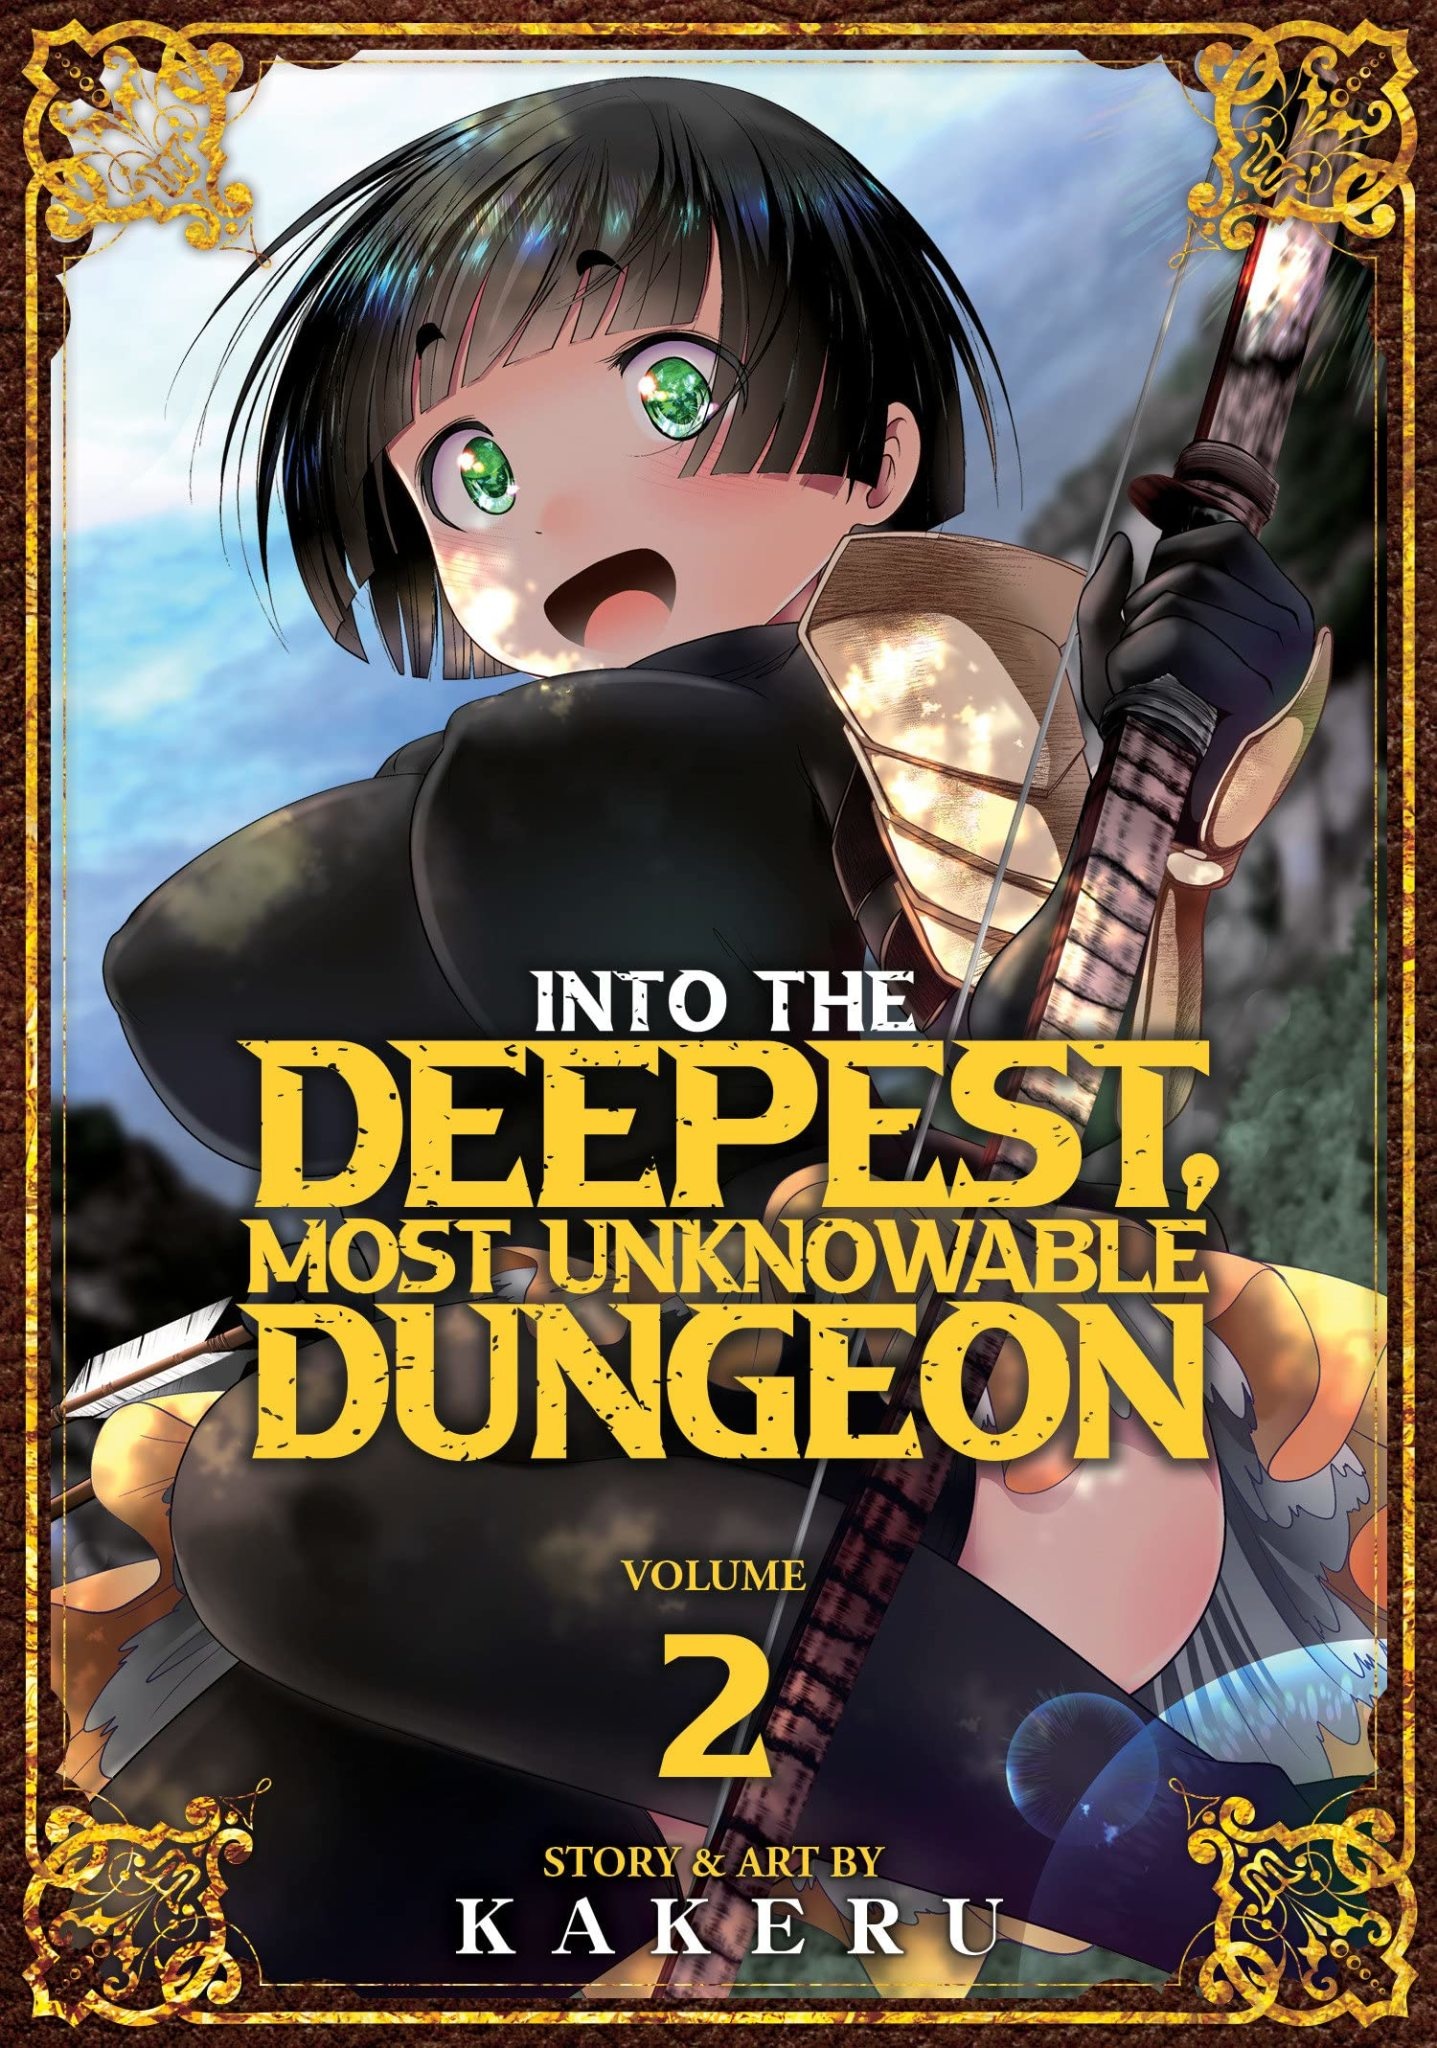 Into the Deepest, Most Unknowable Dungeon Vol 2 (MR)